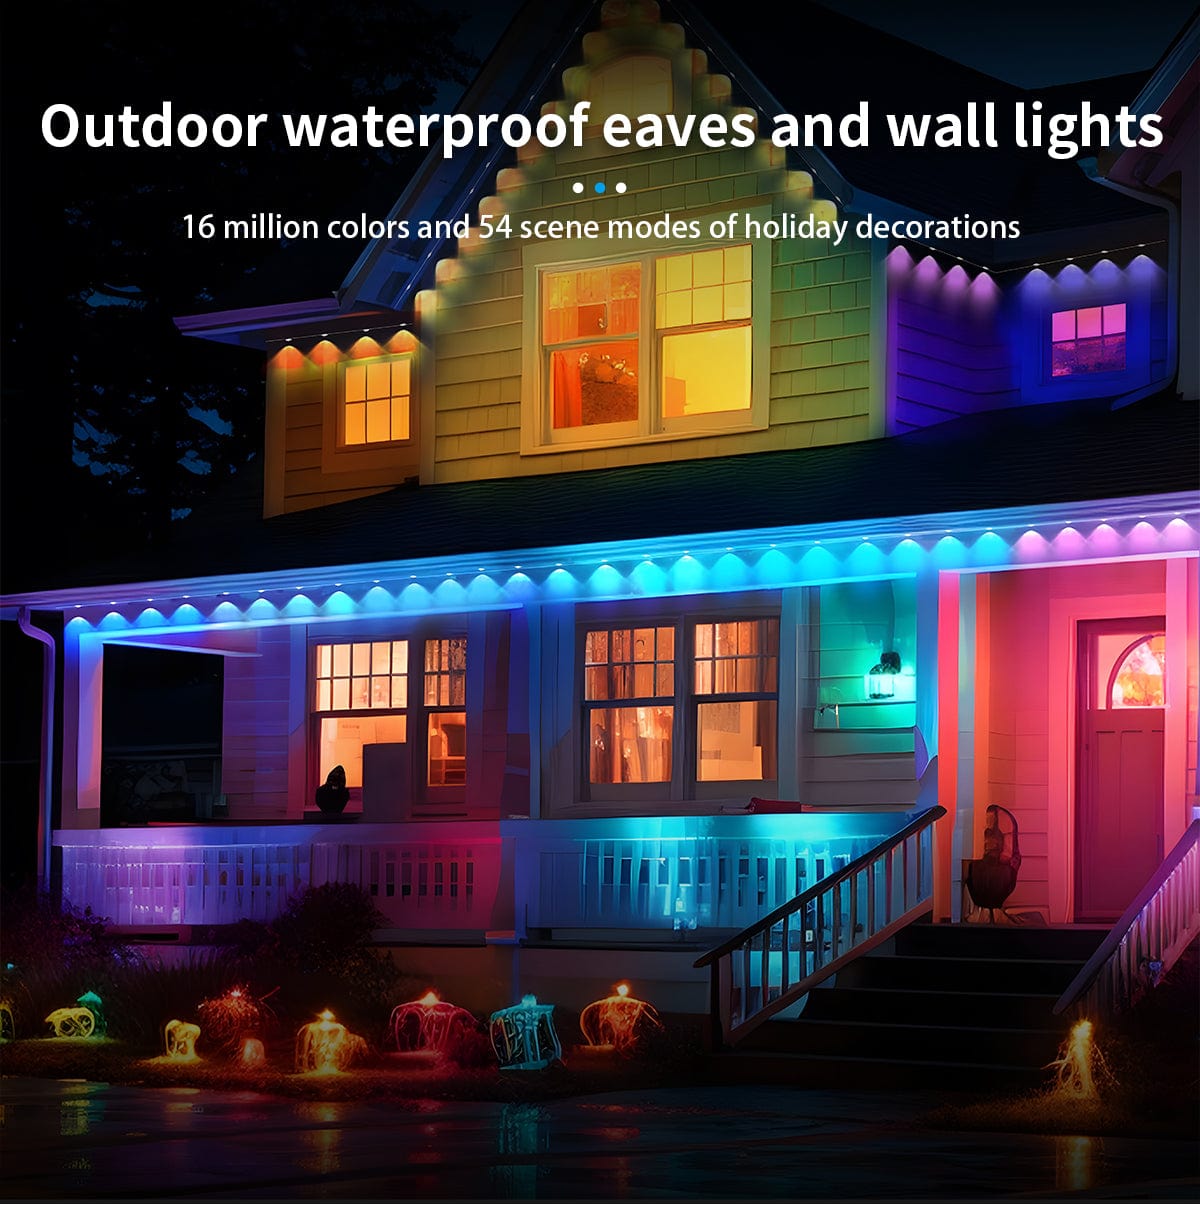 Permanent Outdoor Lights 48 ft/14.5 m RGBIC LED String, 20 LED Warm White Eave Lights, Remote Control - IP67 Waterproof with 75 Scene Modes for Outdoor Decorations ZOOBERS